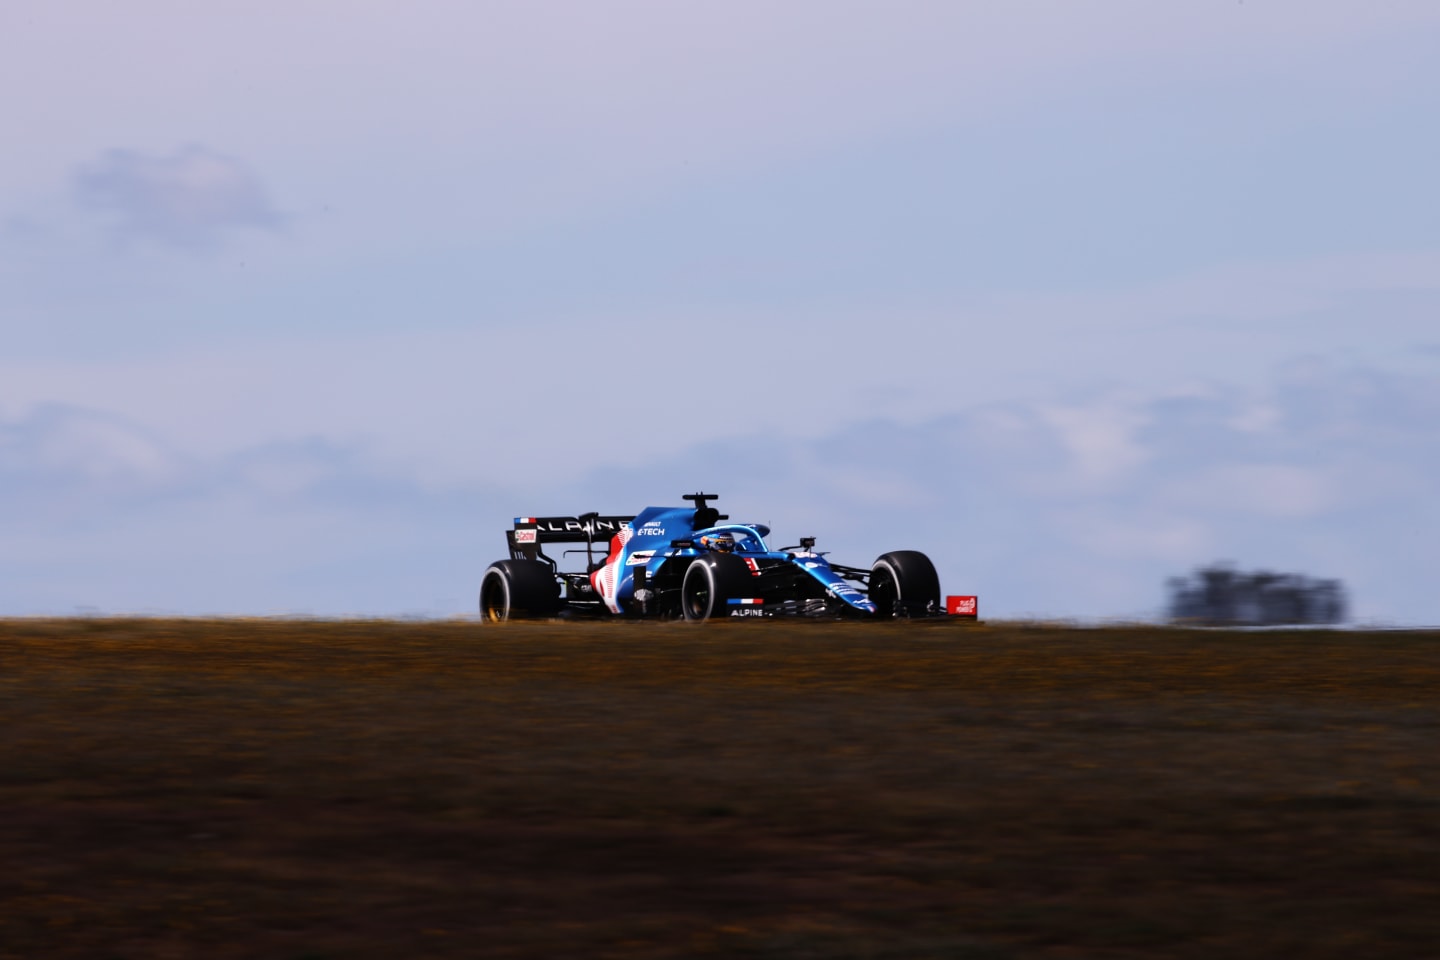 PORTIMAO, PORTUGAL - APRIL 30: Fernando Alonso of Spain driving the (14) Alpine A521 Renault on track during practice ahead of the F1 Grand Prix of Portugal at Autodromo Internacional Do Algarve on April 30, 2021 in Portimao, Portugal. (Photo by Lars Baron/Getty Images)